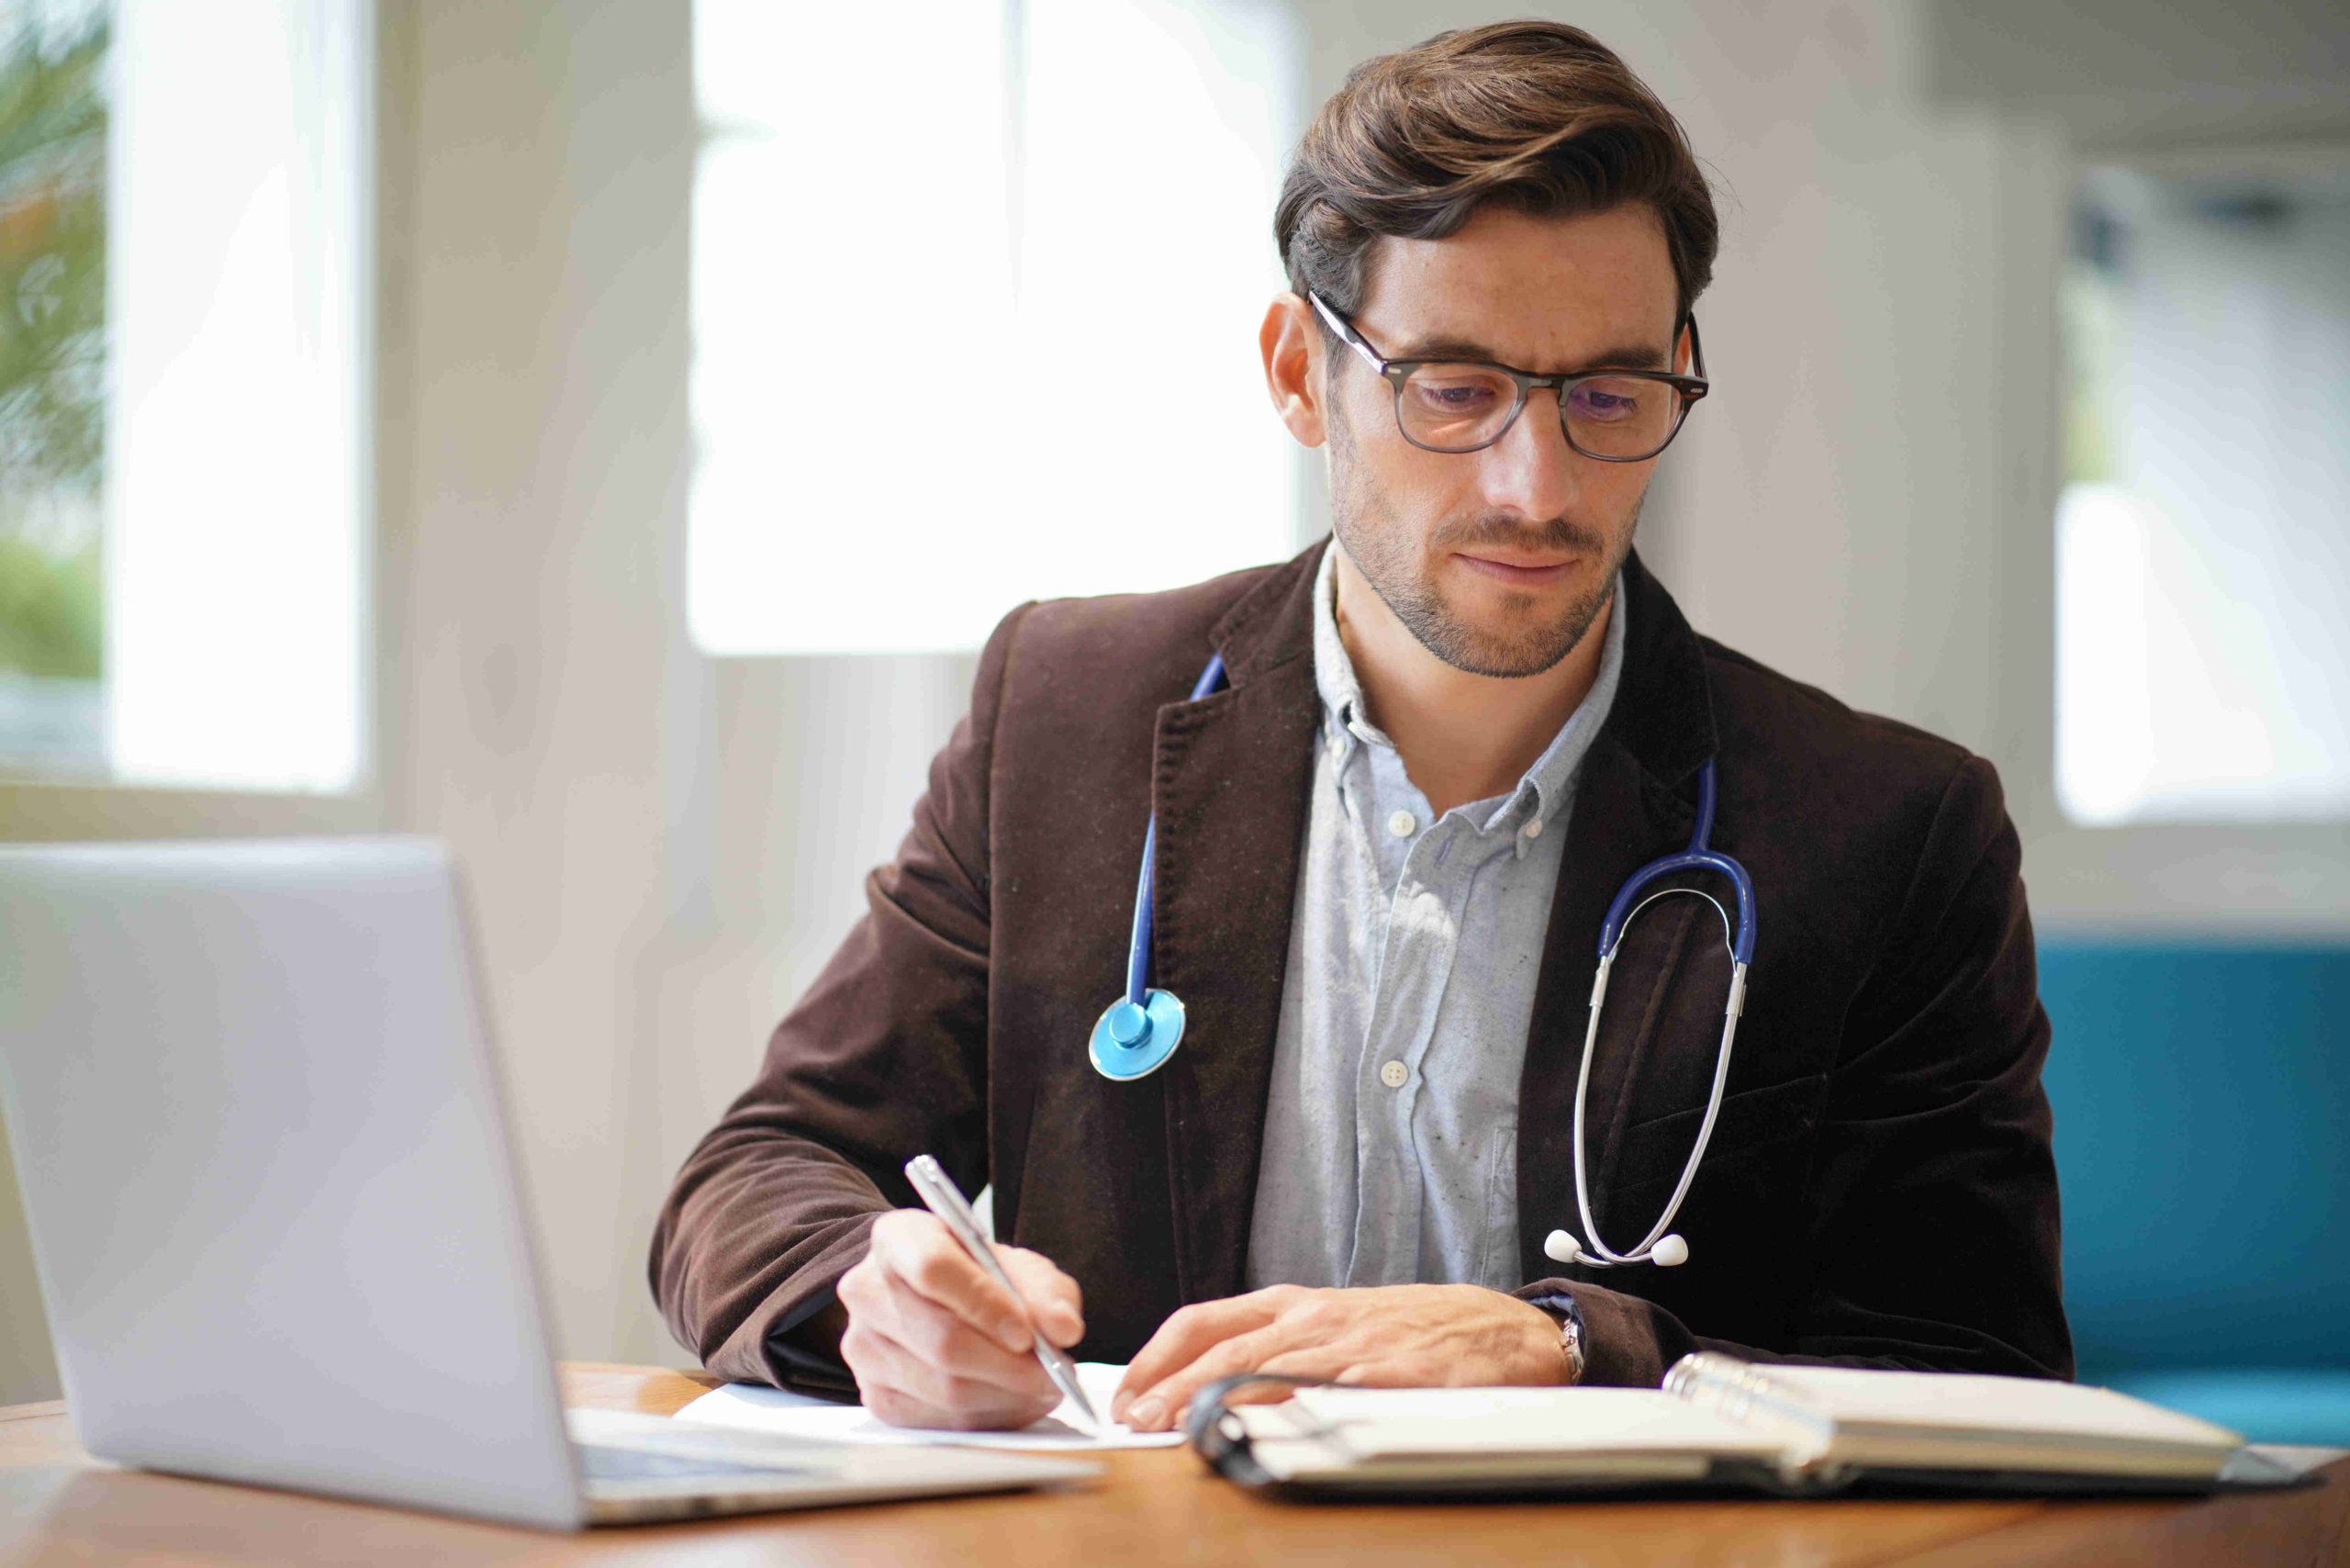 Why Private Practices Should Consider Outsourcing Medical Billing